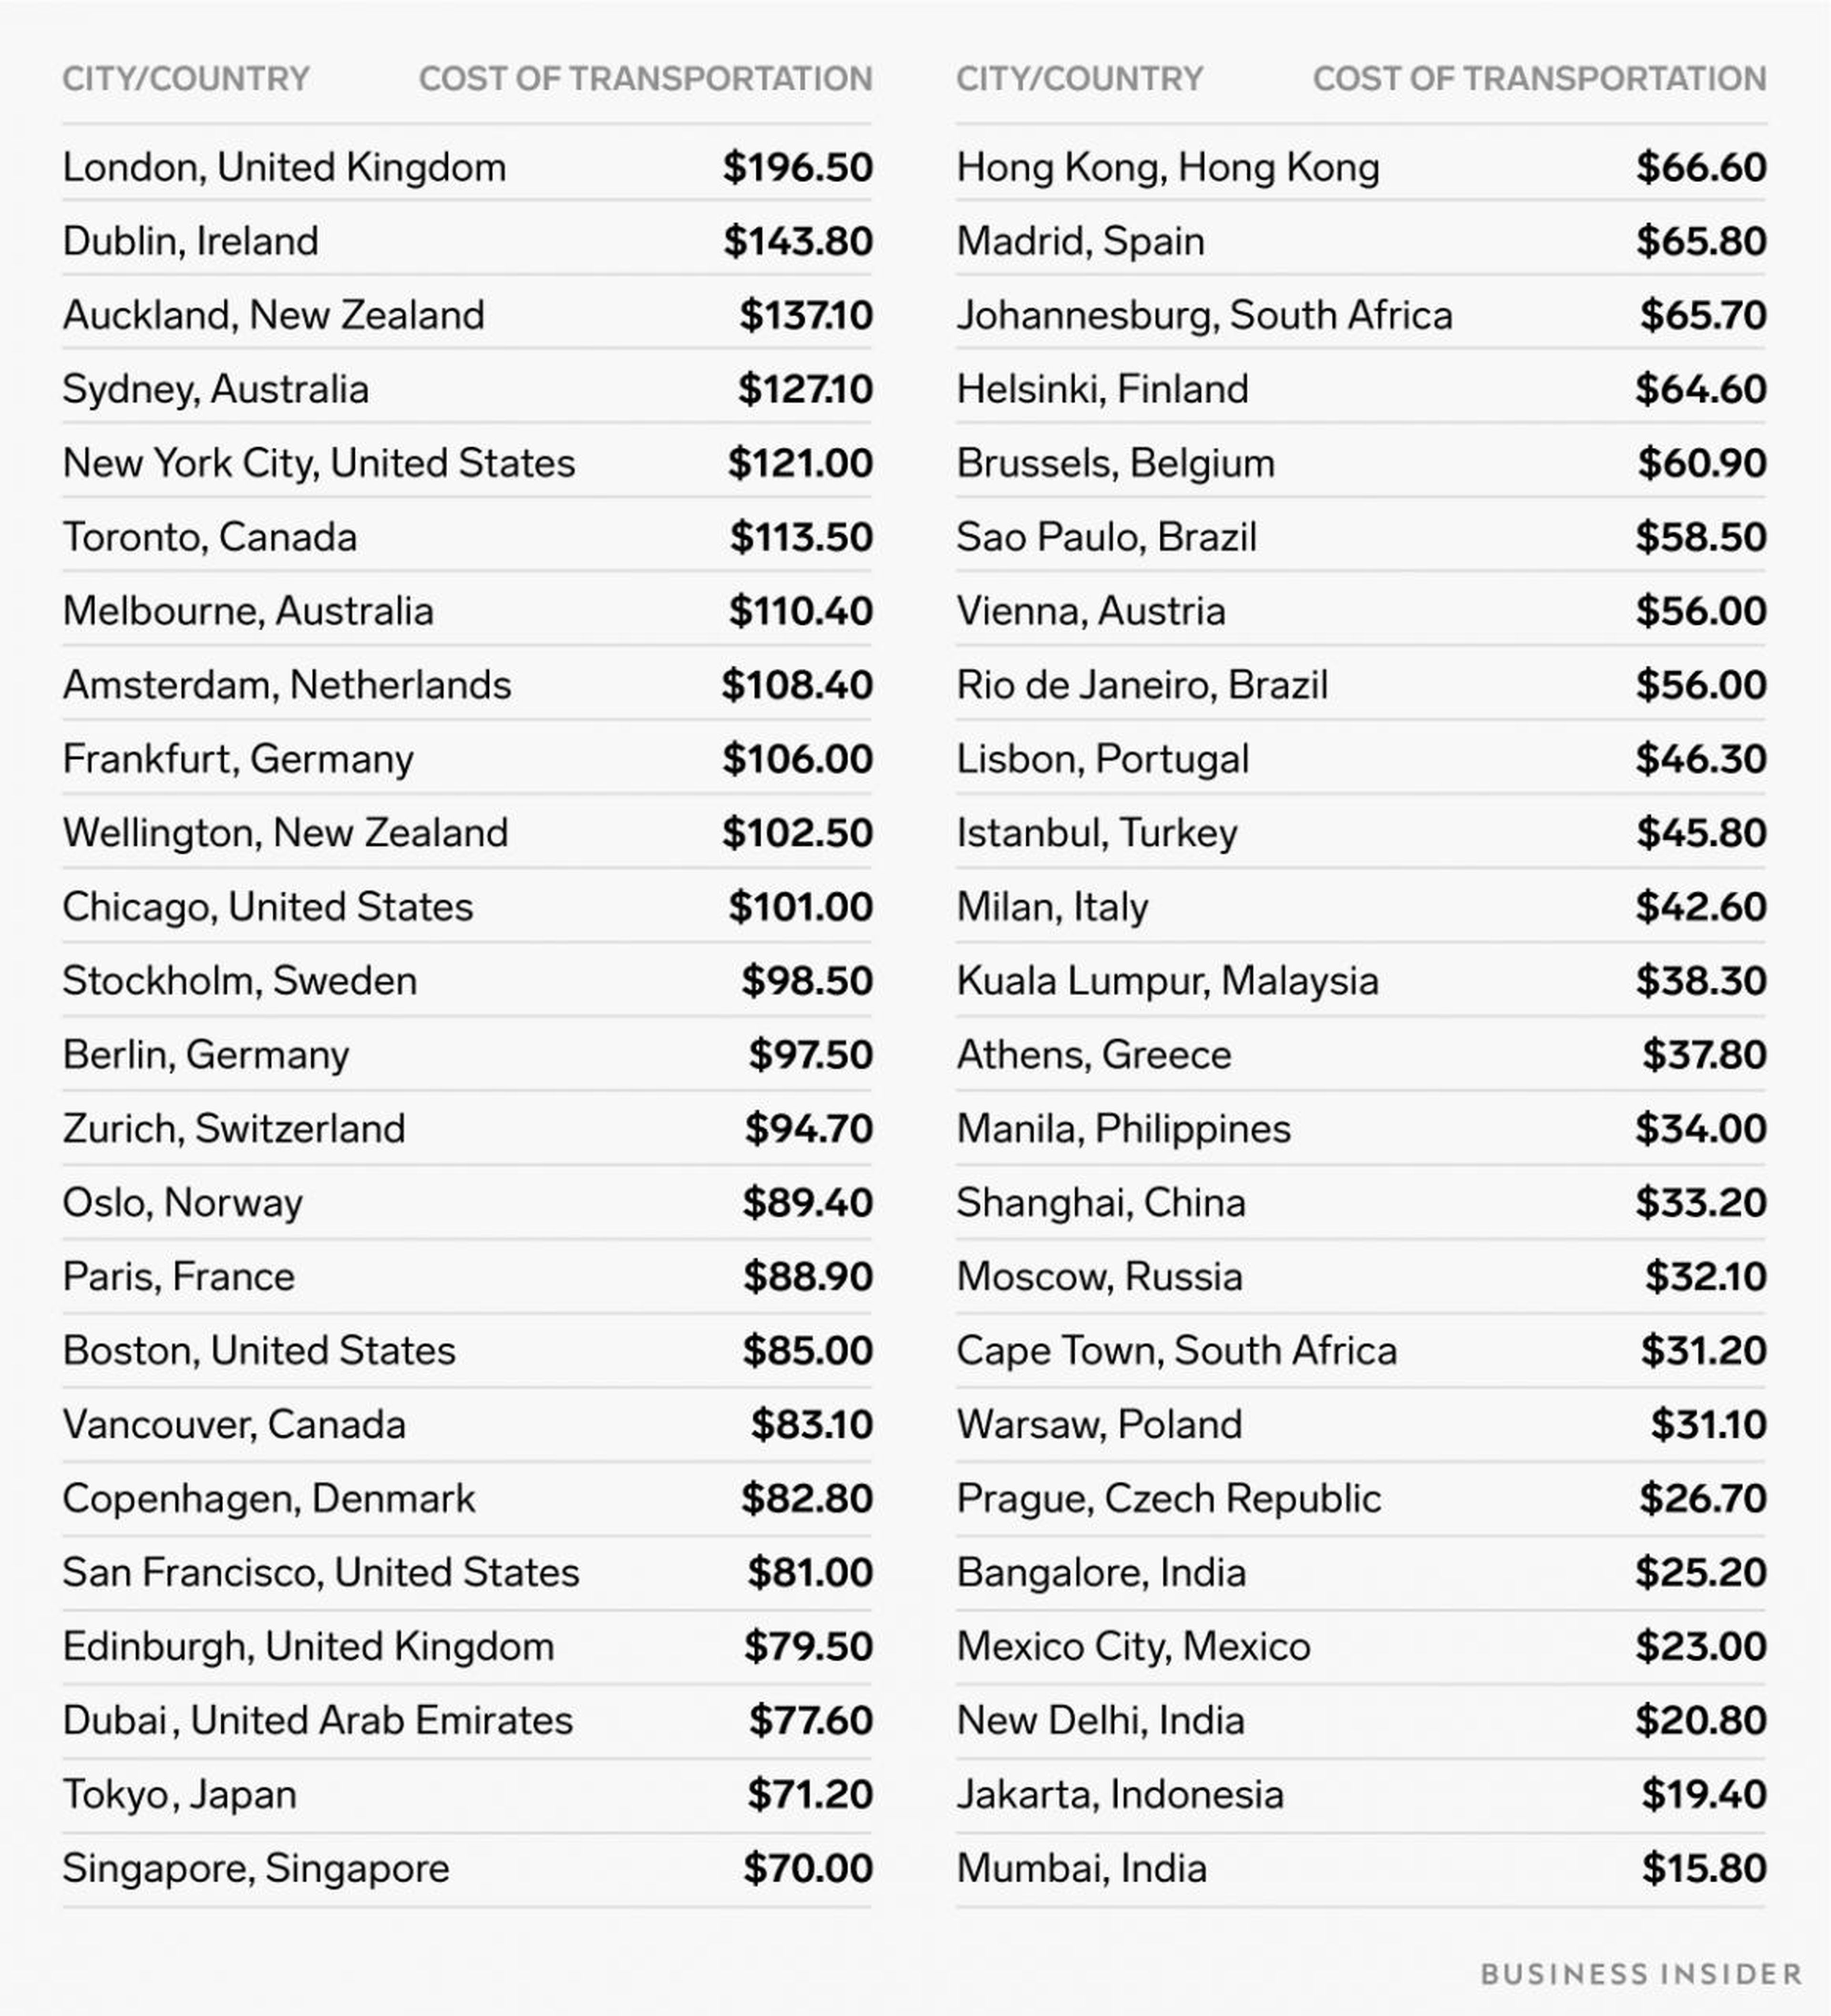 London has the most expensive monthly transit ticket and Mumbai has the cheapest.